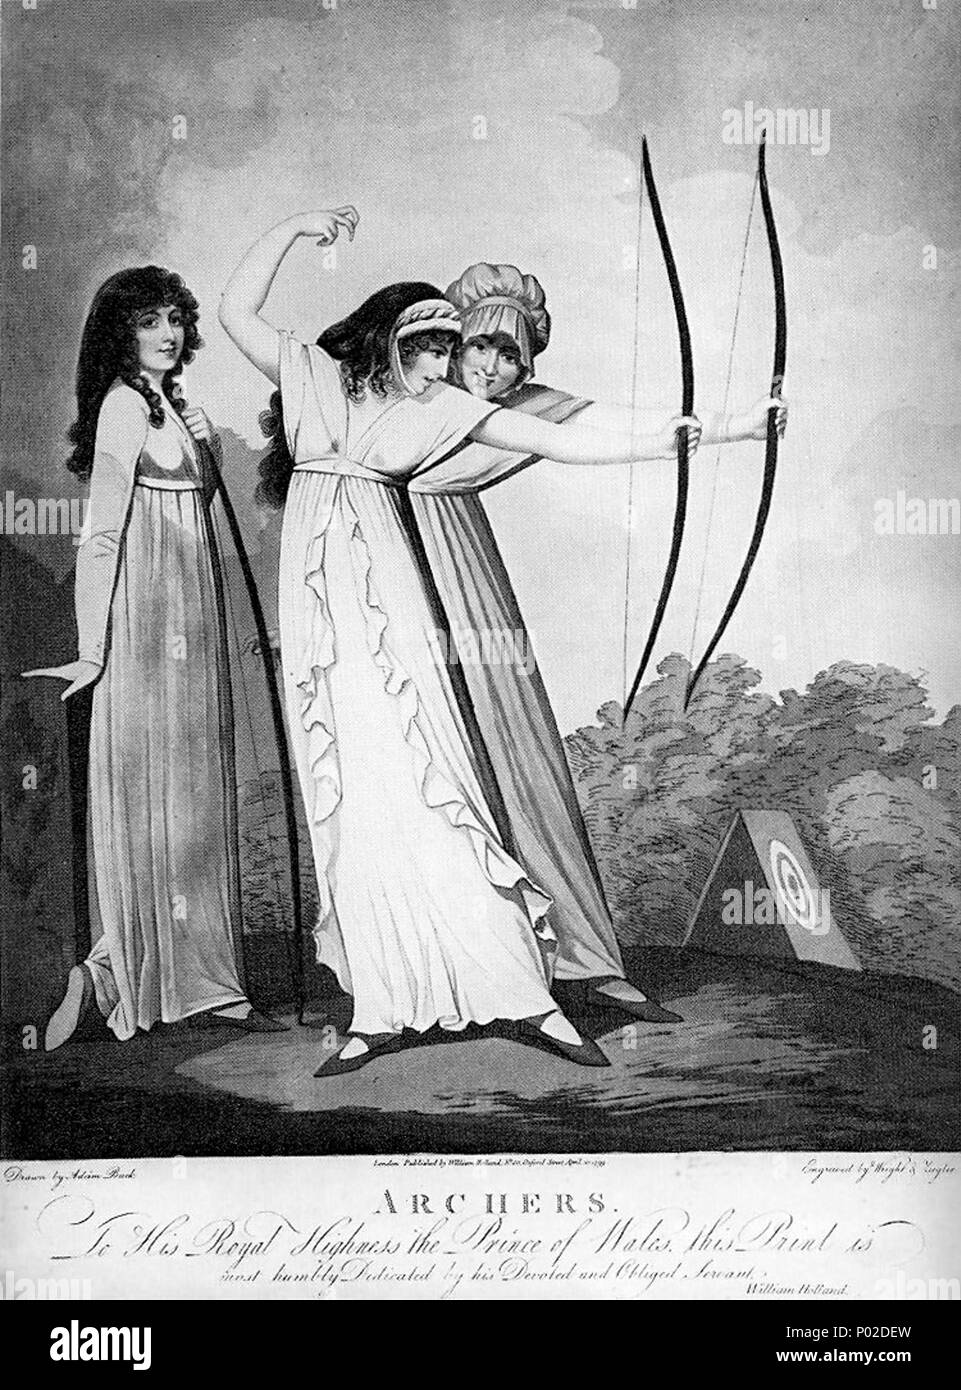 . 'Archers', an April 1799 'pin-up' type print, engraved after a drawing by Adam Buck, and with a dedication to the Prince Regent. At the time, archery was one of the few competitive sports that adult women of the 'genteel' classes could respectably engage in (others were battledore/shuttlecock -- a precursor to badminton -- and for a tiny social elite, old-fashioned 'court tennis'). For discussion of ca. 1800 'pin-up' prints, see image description page Image:1800-jumprope-pinup-Sophia-Western.jpg . What might not be obvious from a 21st-century point of view is that in 1799 the loosely-flowing Stock Photo